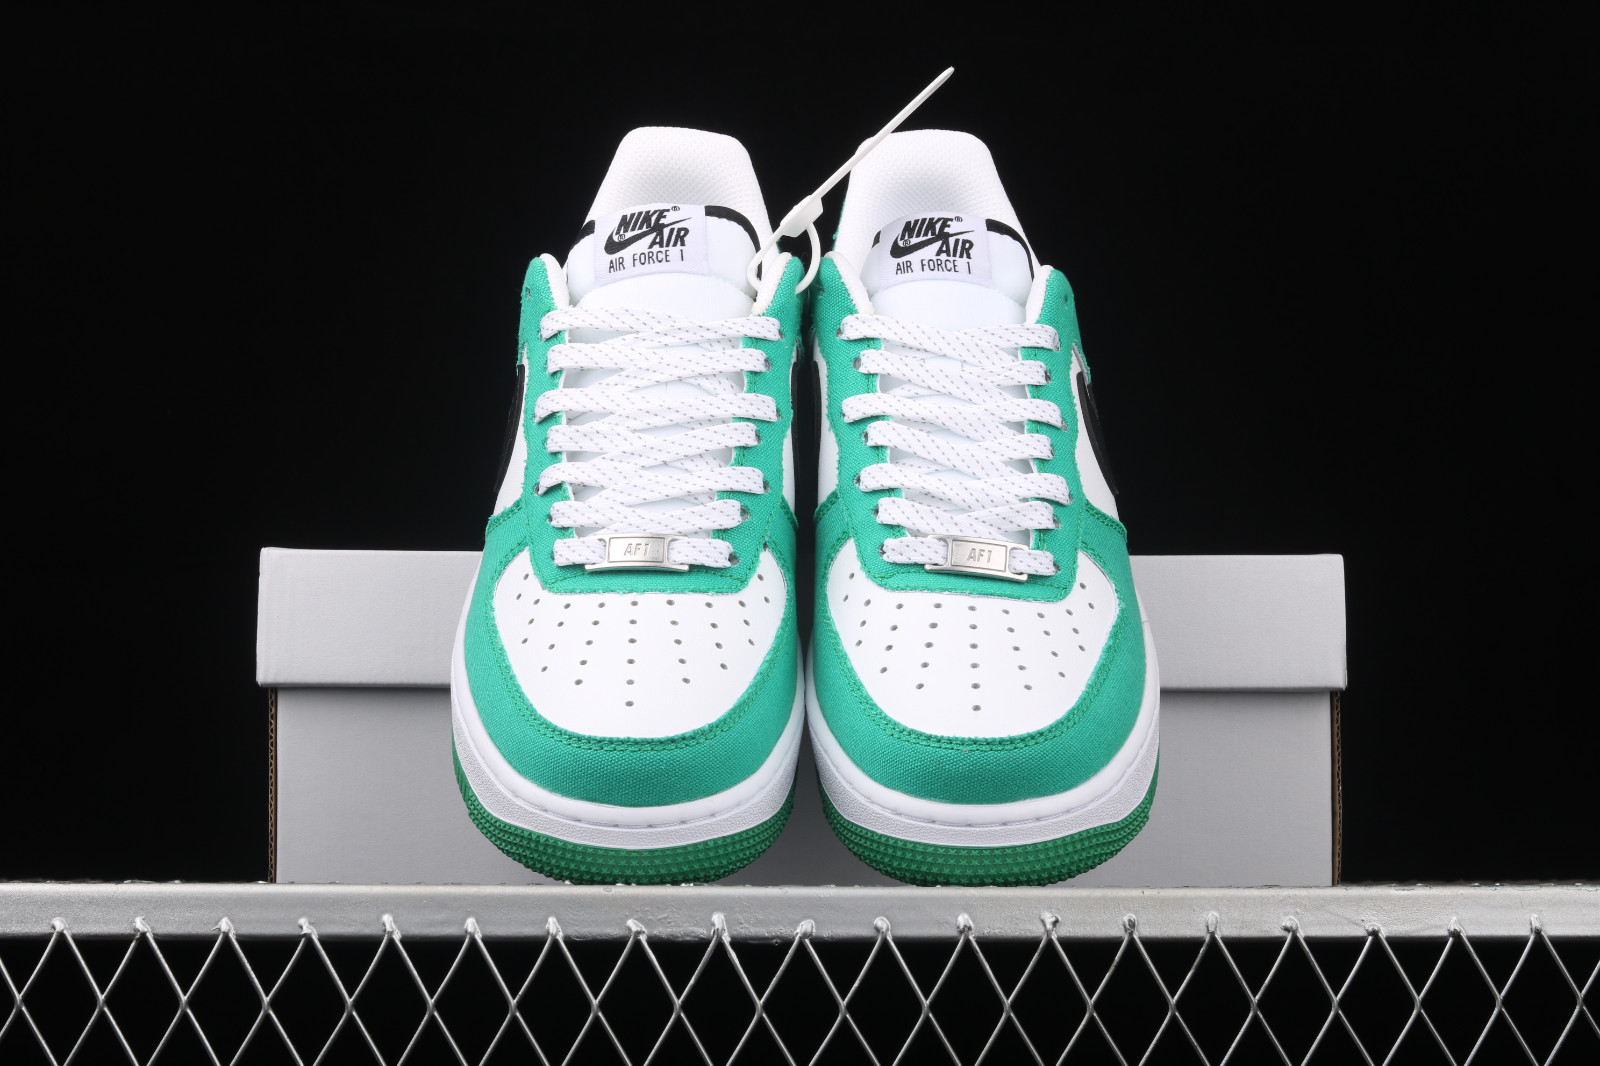 GmarShops - Nike Air Force release 1 07 Low White Green Black Shoes 315122 - 105 - nike air max 95 dc1934 400 date